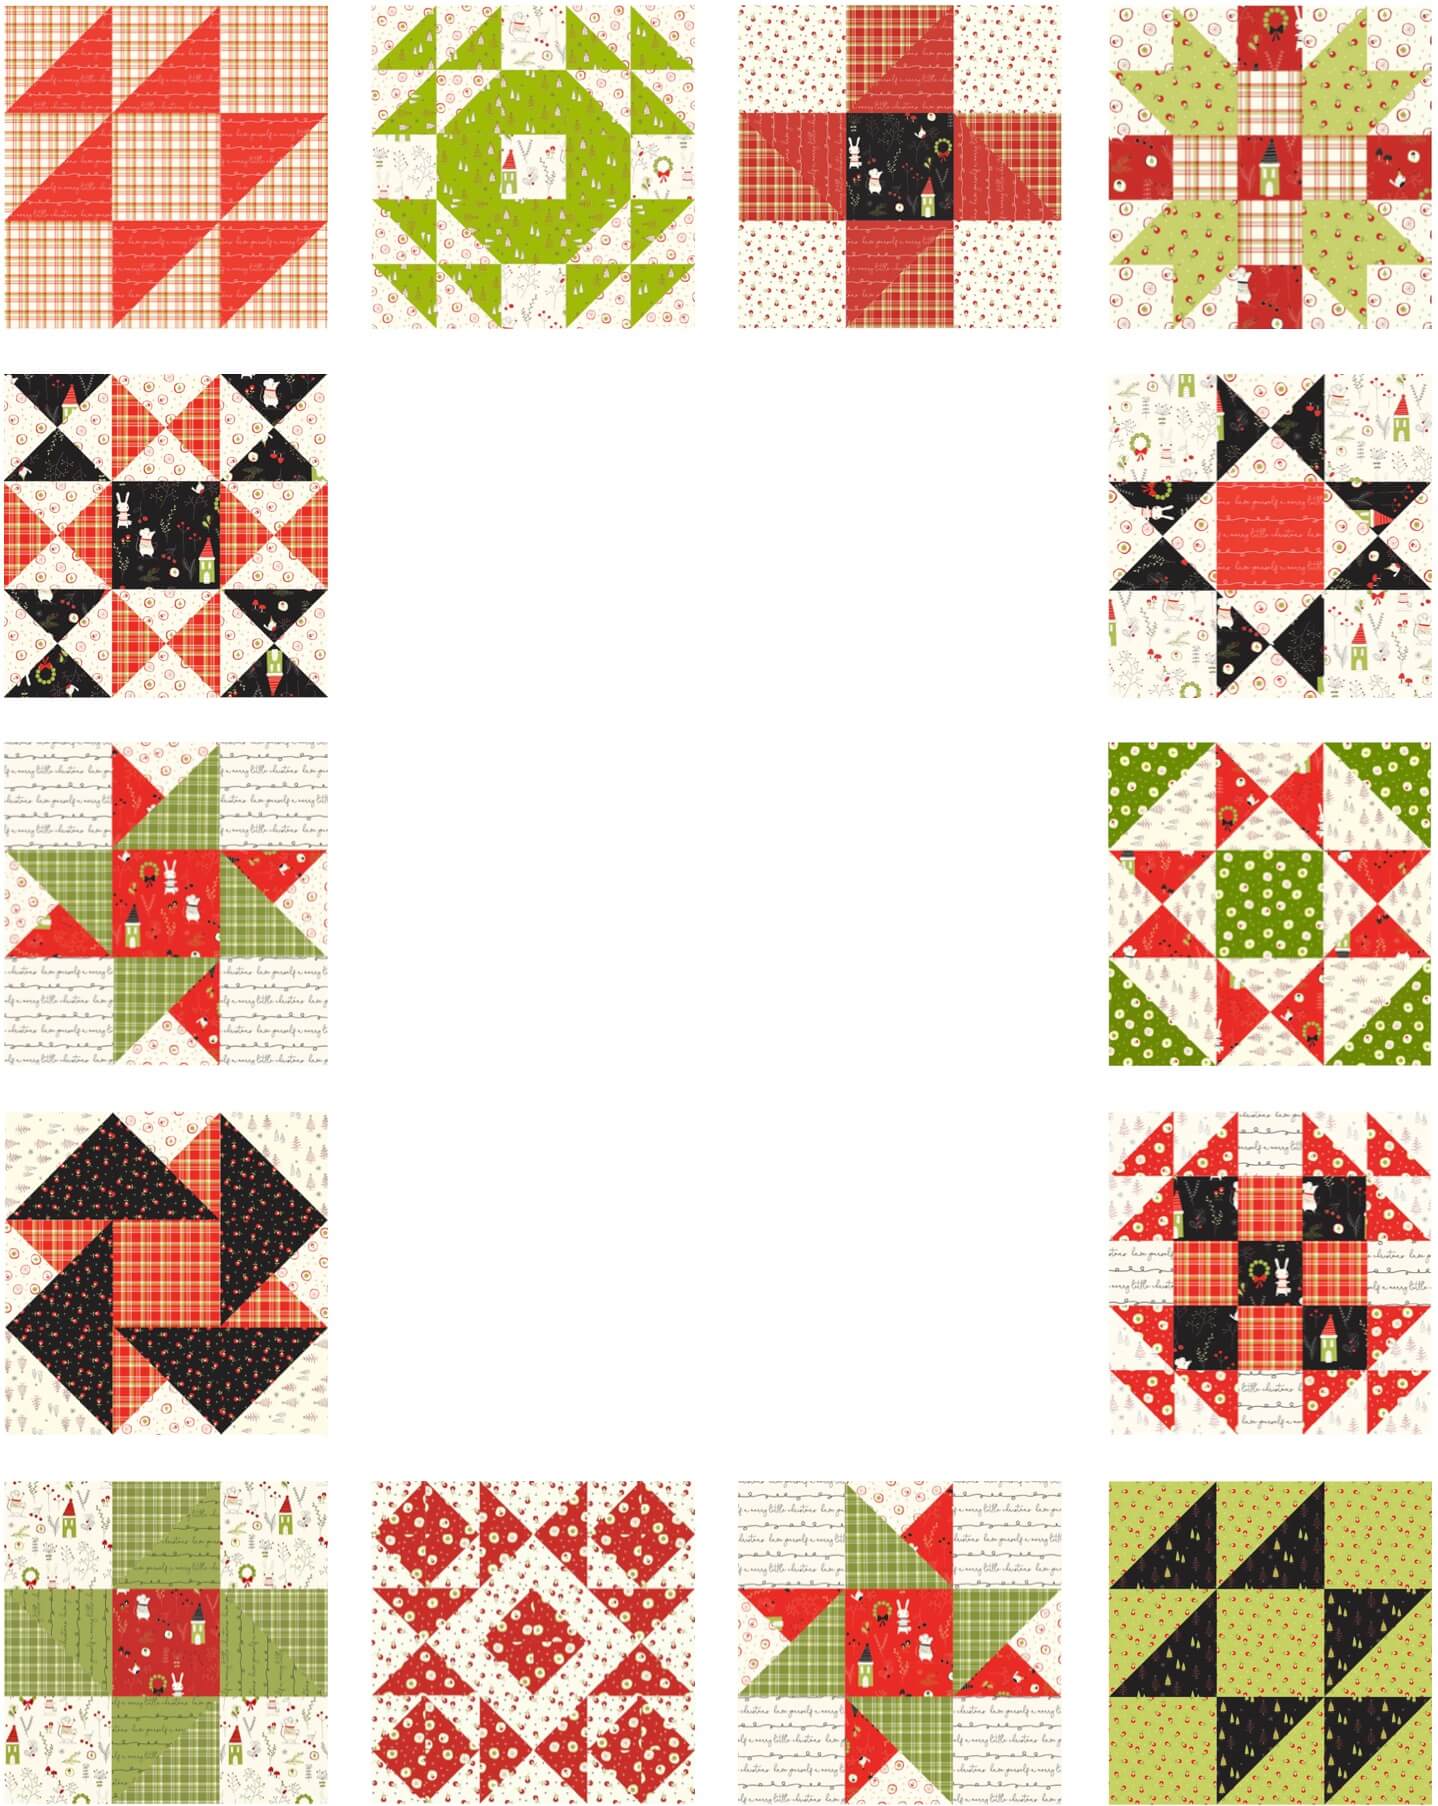 December 2021 NZP Block of the Month: Assemble and Finish!